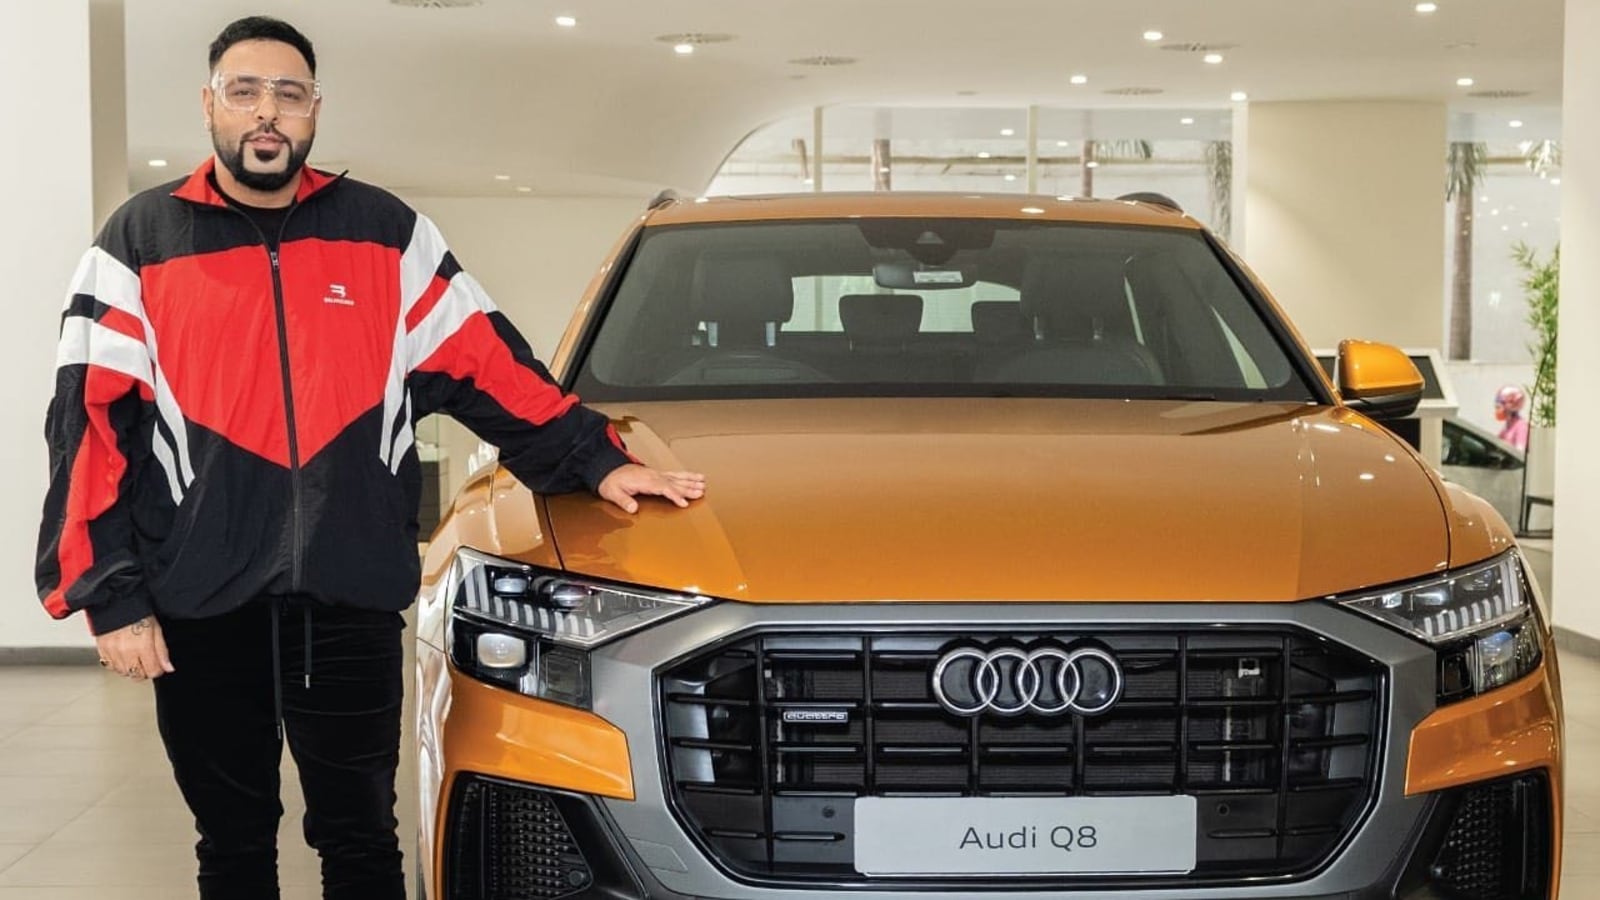 Badshah buys Audi Q8 worth over ?1.23 crore to already large collection - Hindustan Times